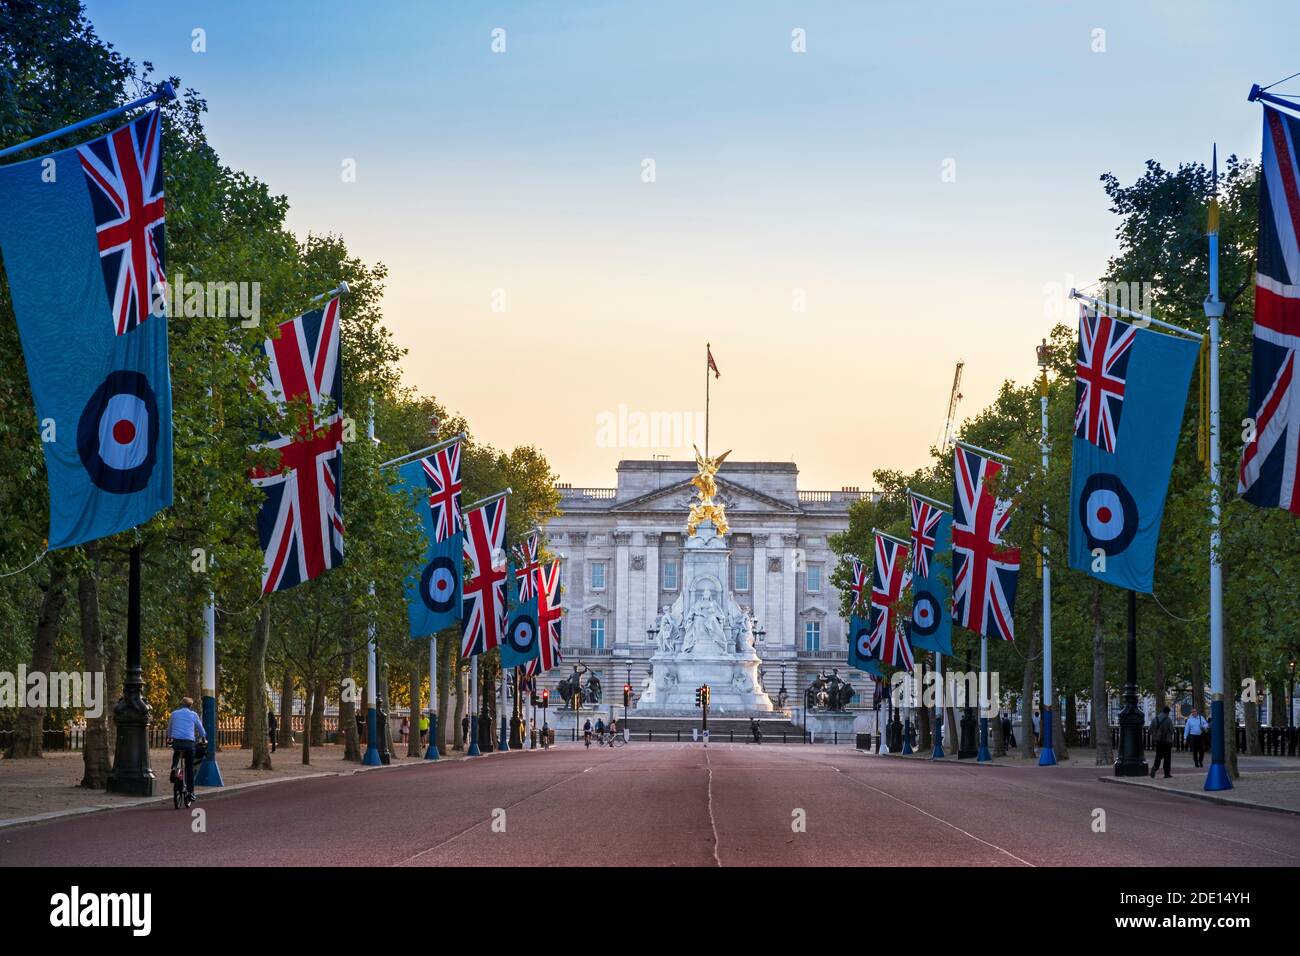 View of Buckingham Palace along the Mall with flags of the Union and Royal Air Force, Westminster, London, England, United Kingdom, Europe Stock Photo